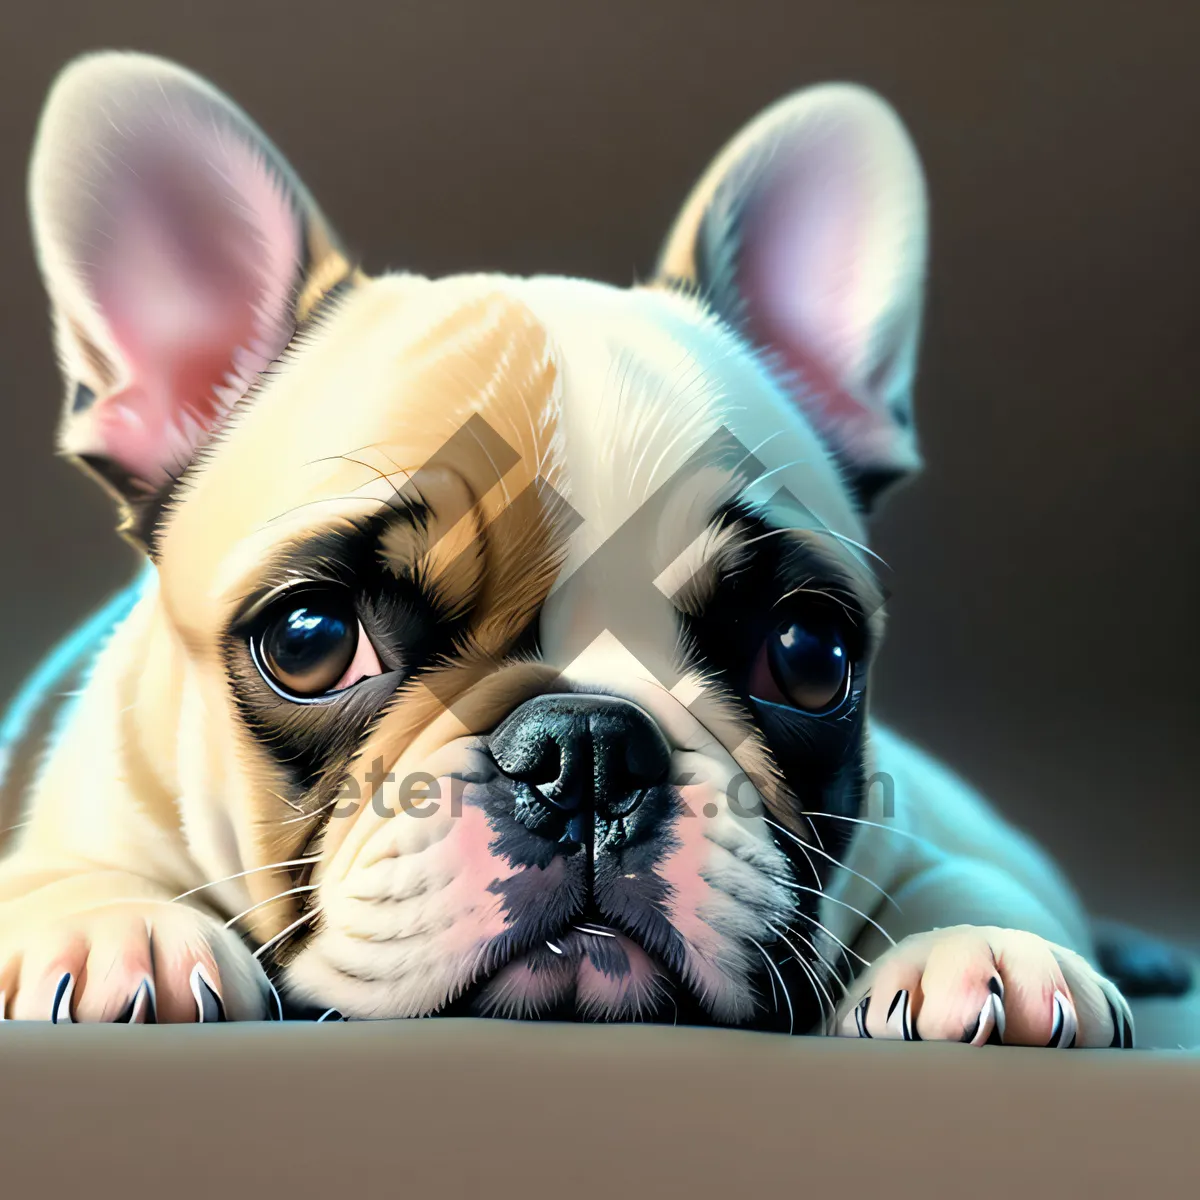 Picture of Adorable Wrinkle-faced Bulldog Sitting In Studio